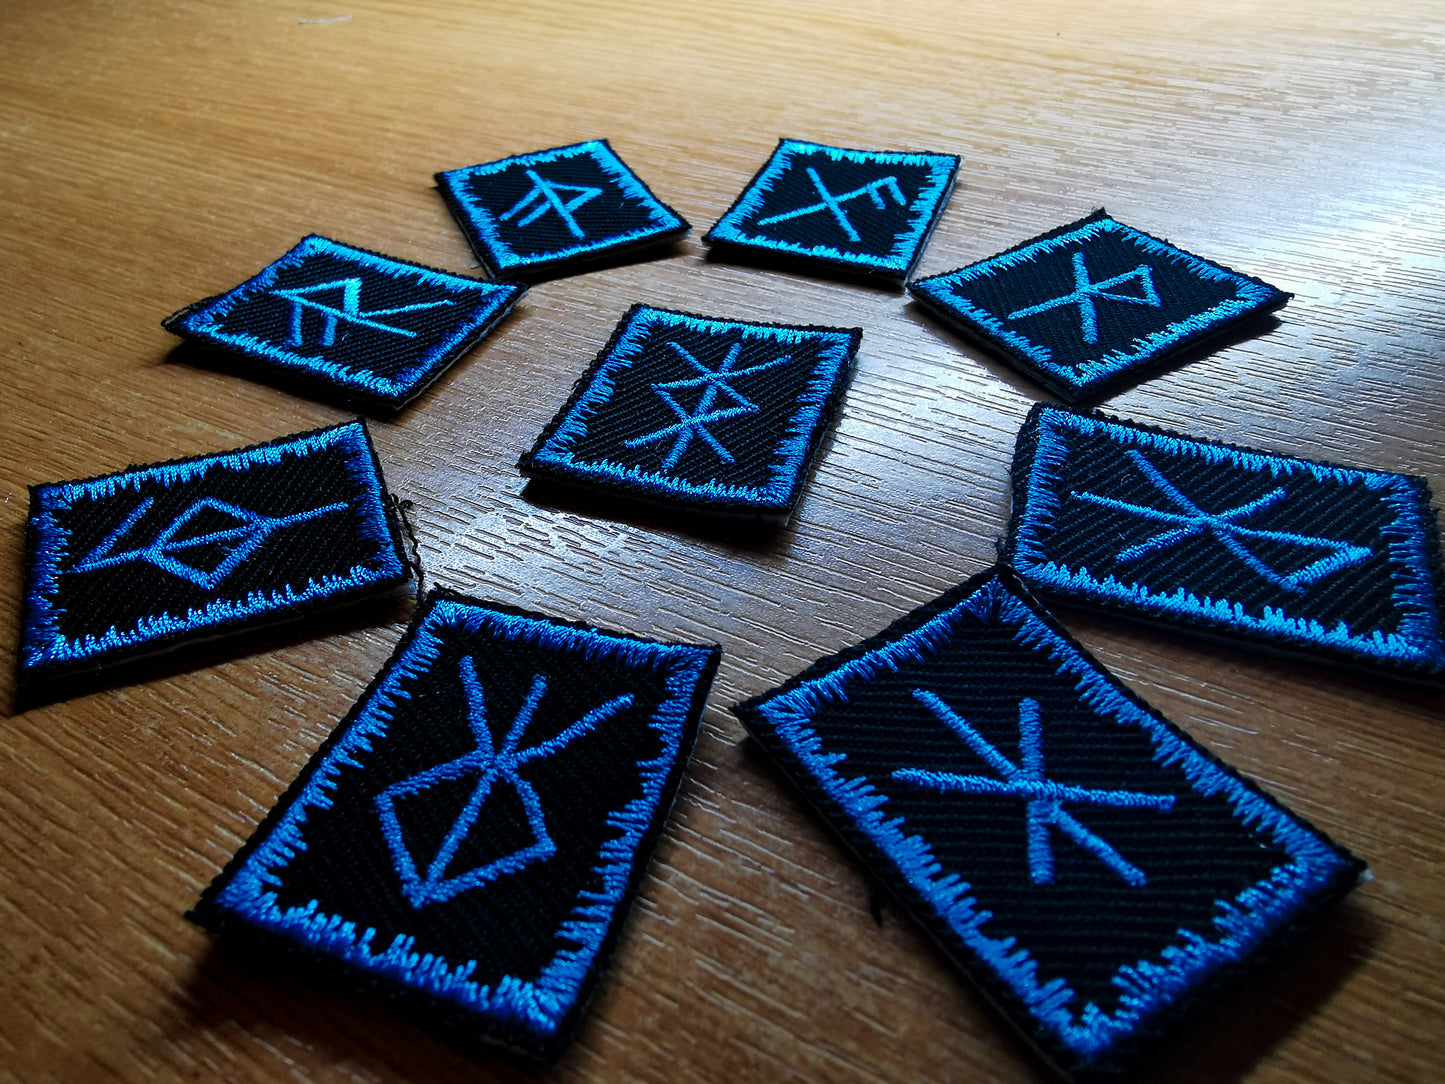 Sea Blue Bindrune Patches Embroidered Viking Norse Heathenry Bind Runes